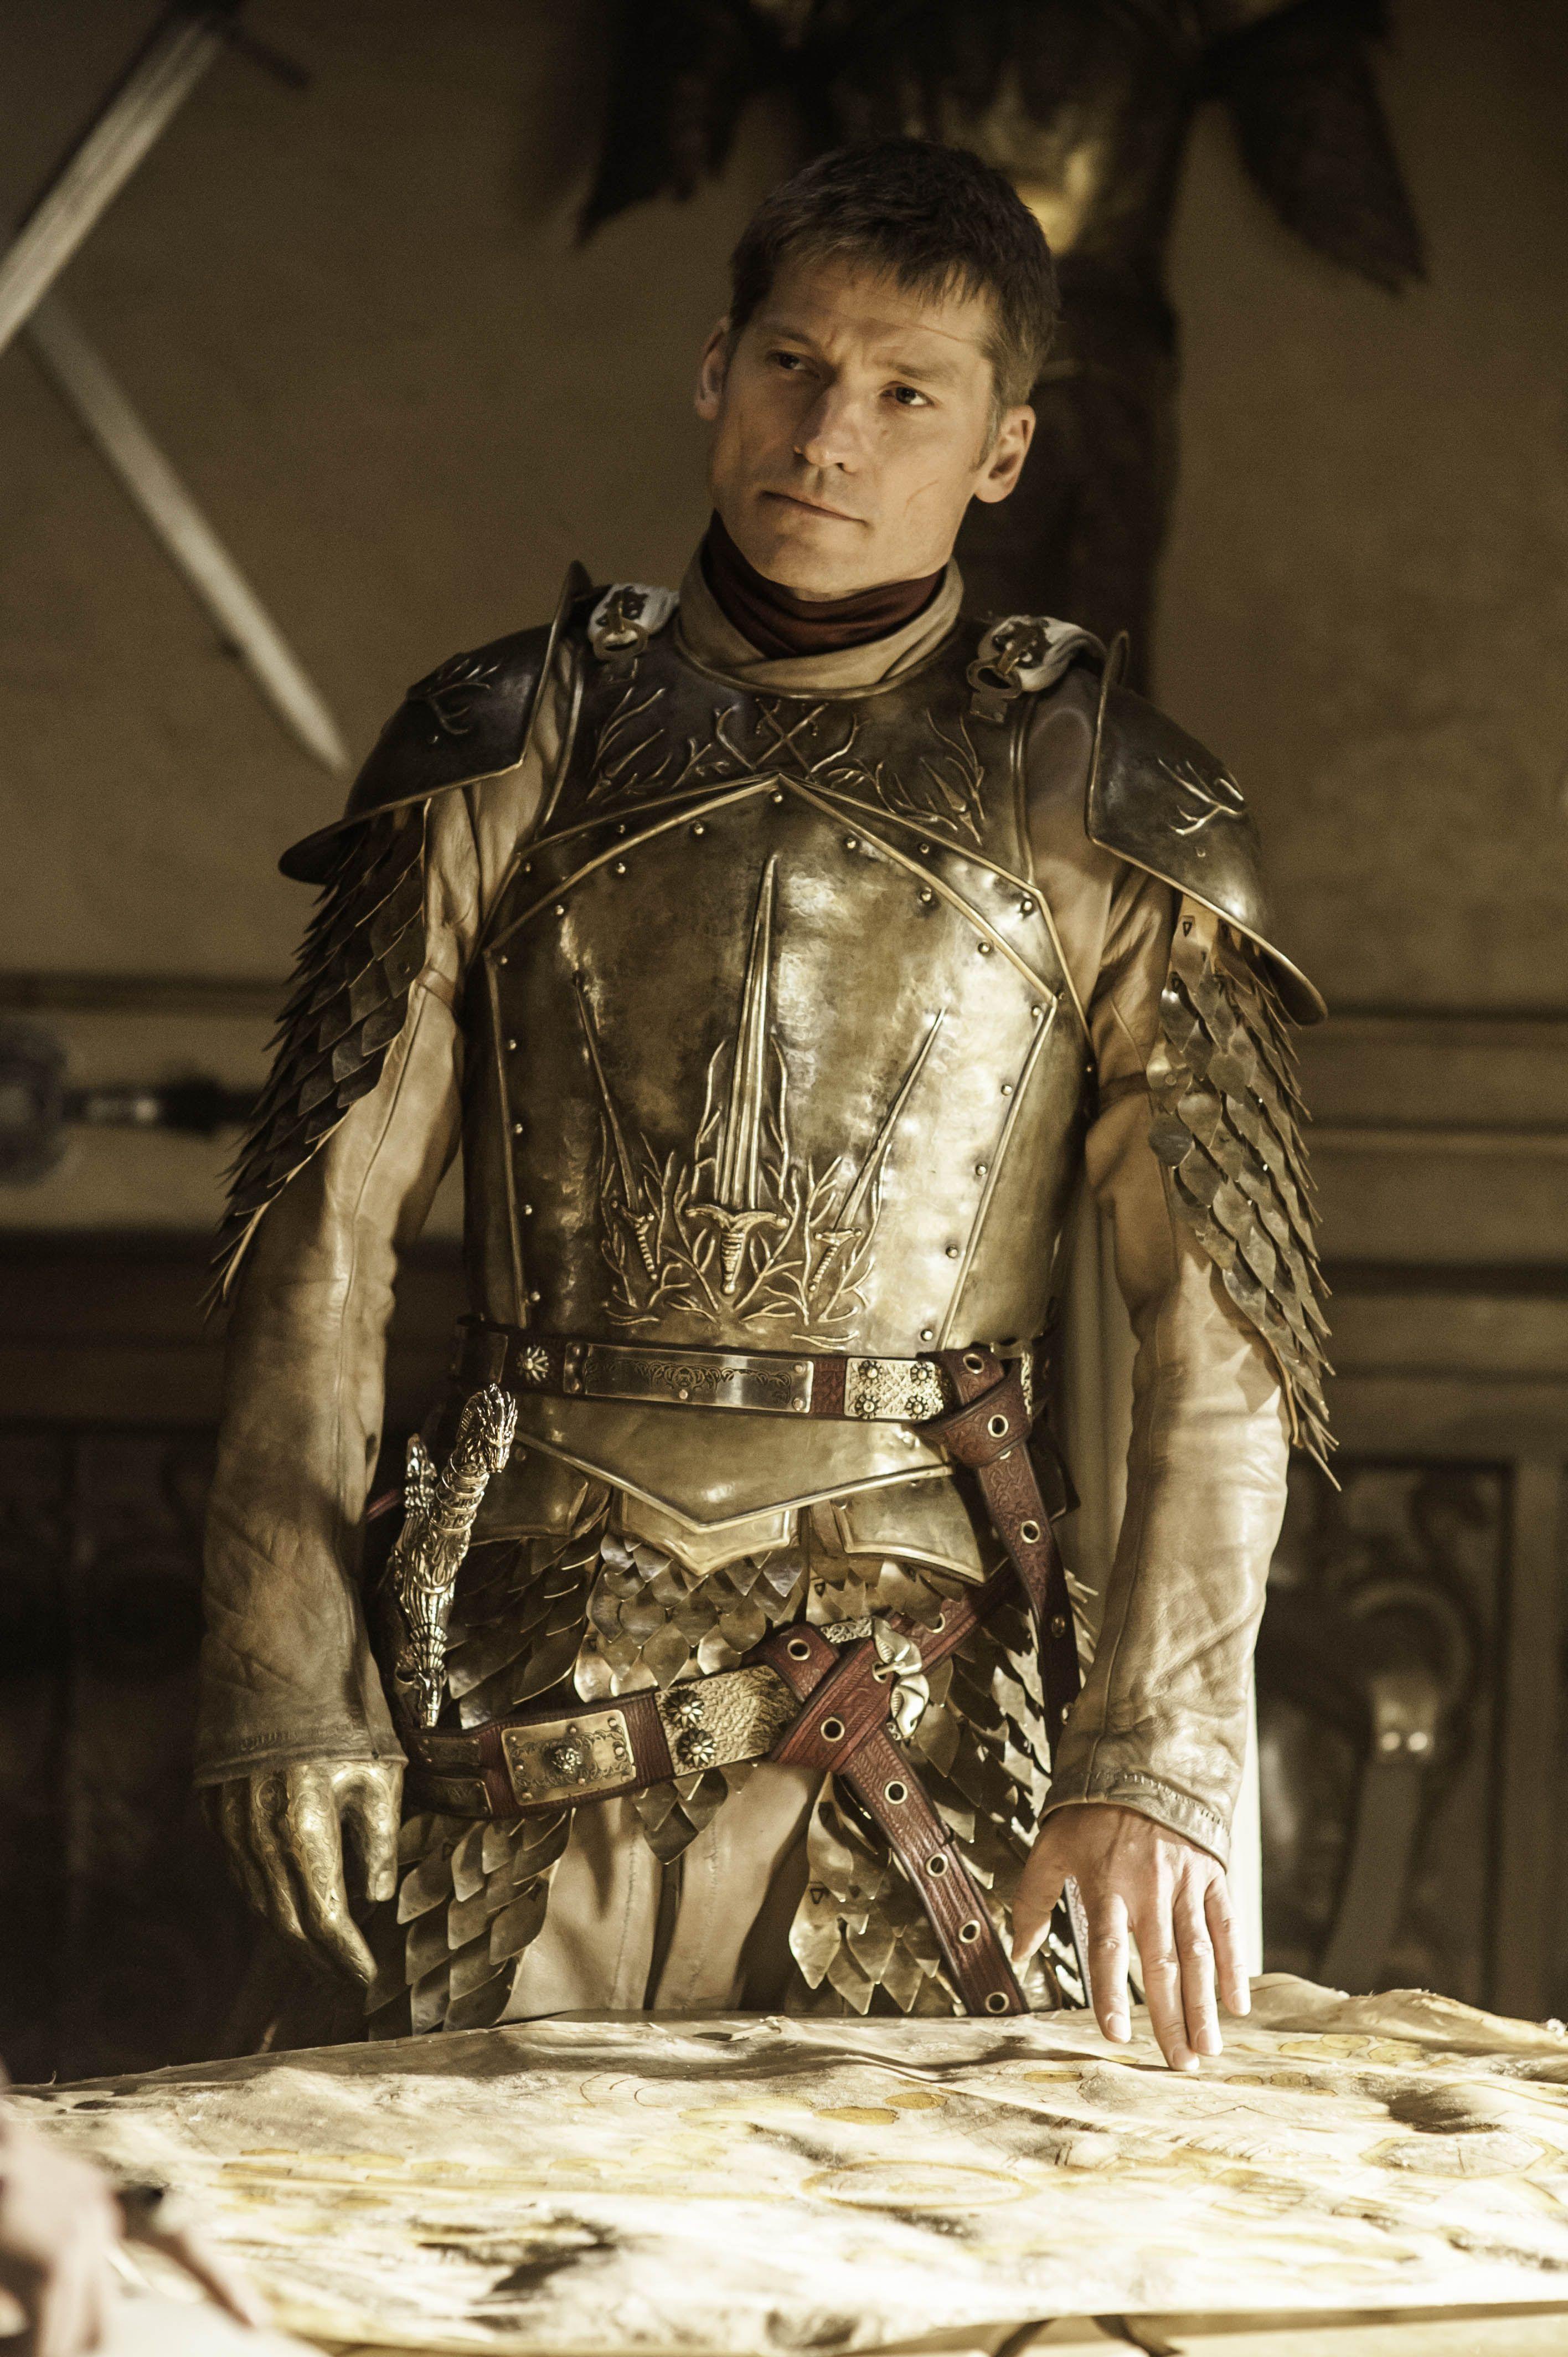 there are no men like me, there is only me., jaime lannister